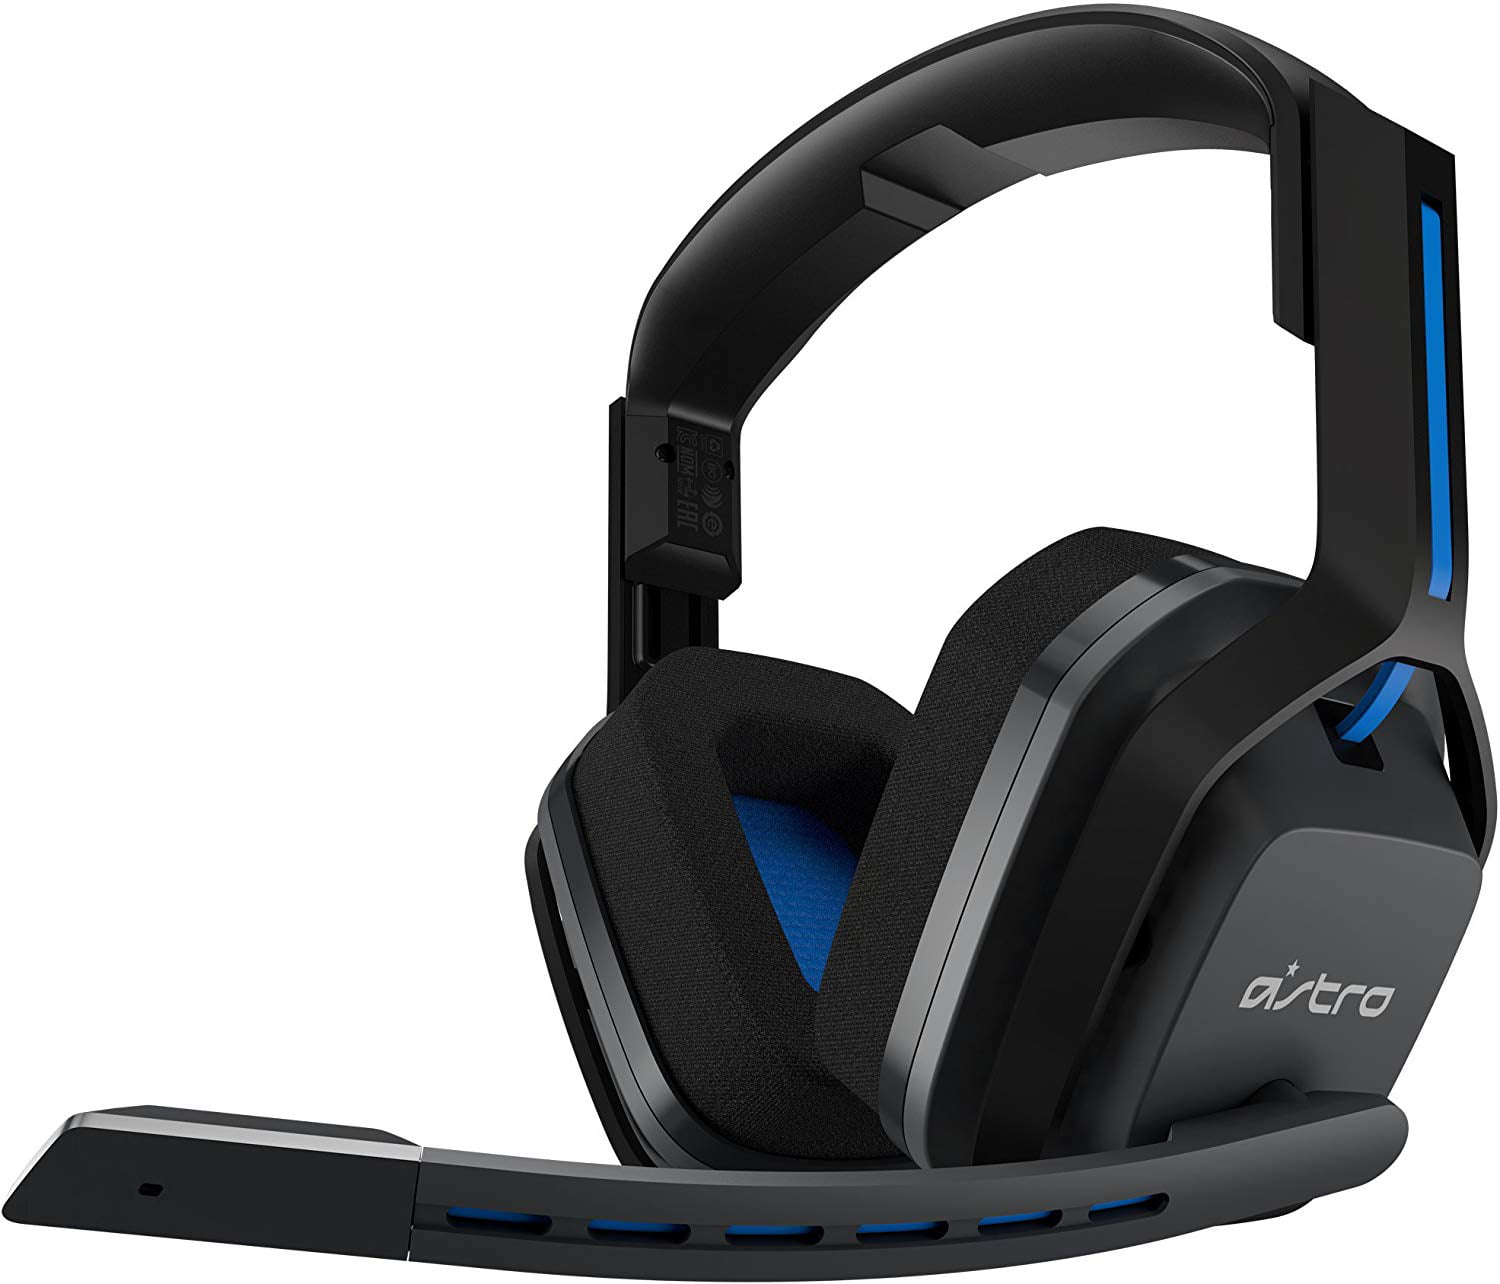 Astro A20 by Logitech Wireless Gaming Headset for PS4 / PC / MAC - Over Ear Headphones with Boom Microphone - Blue/Black - Renewed